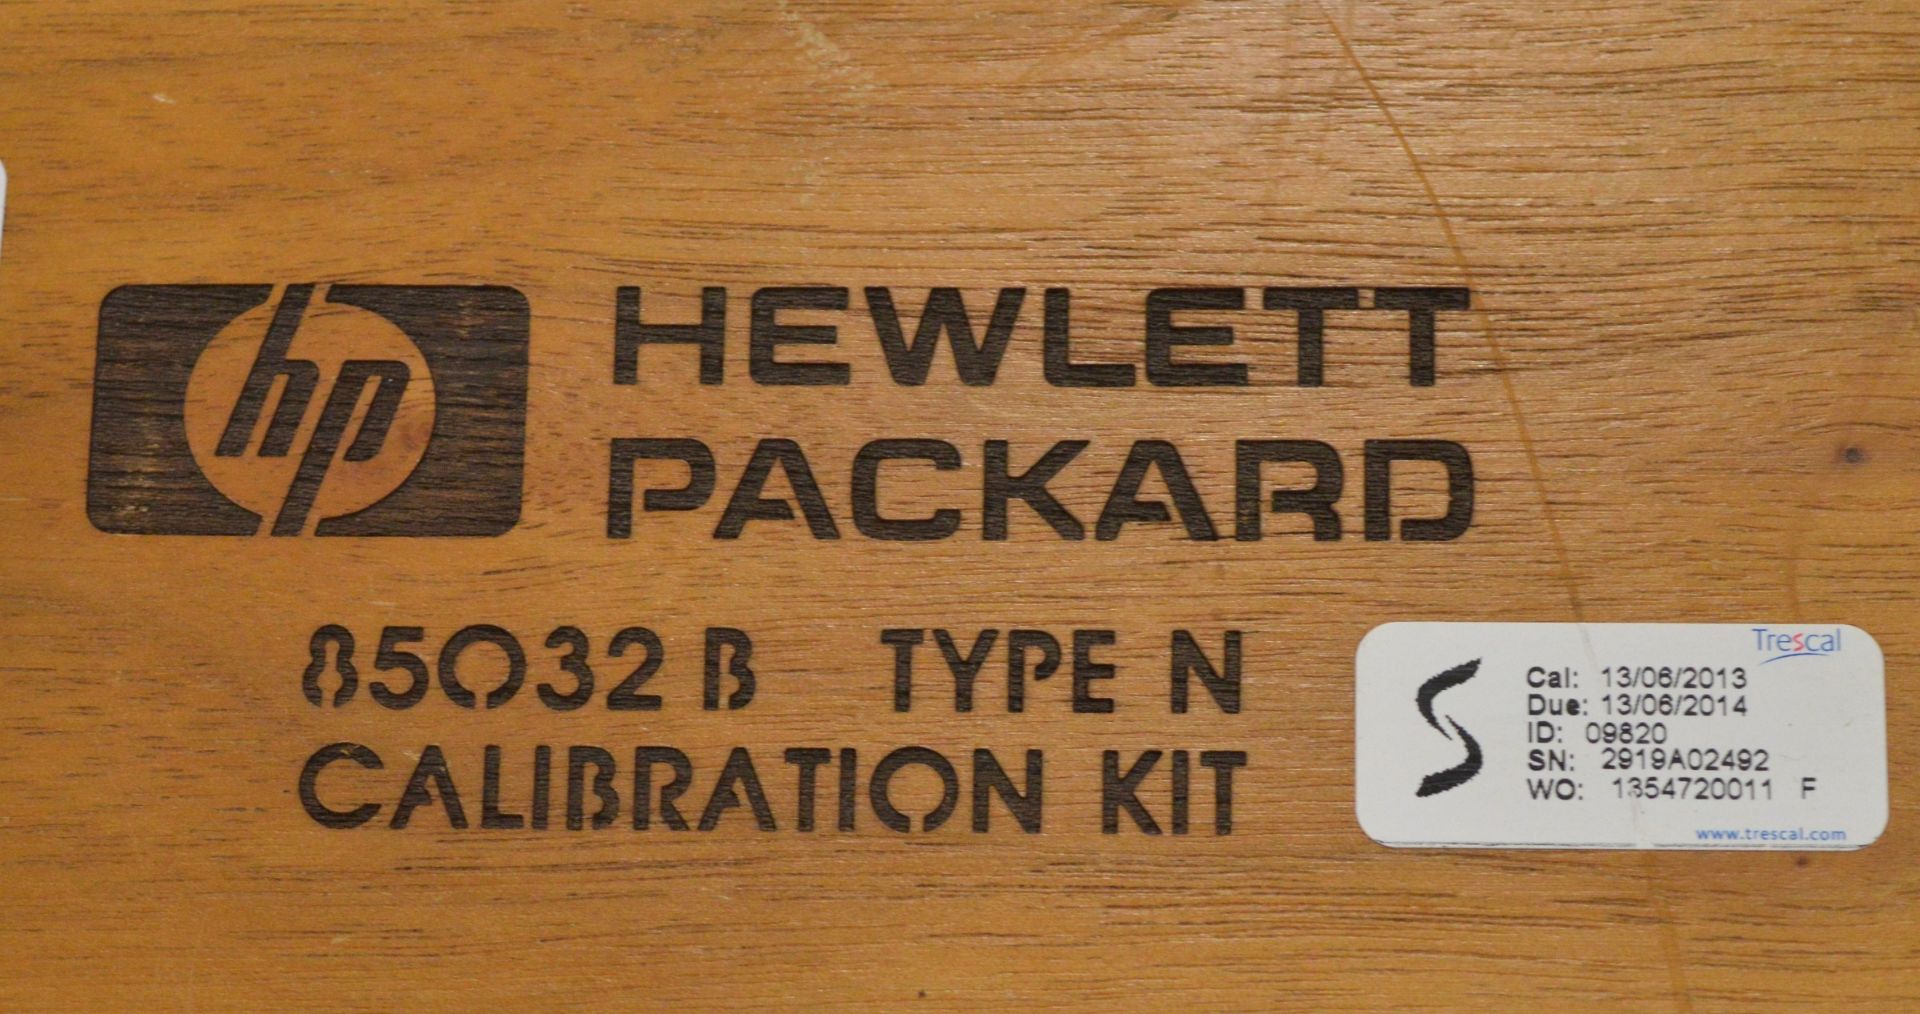 HP 85032B Calibration Kit In a Wooden Box (Incomplete) - Image 2 of 2